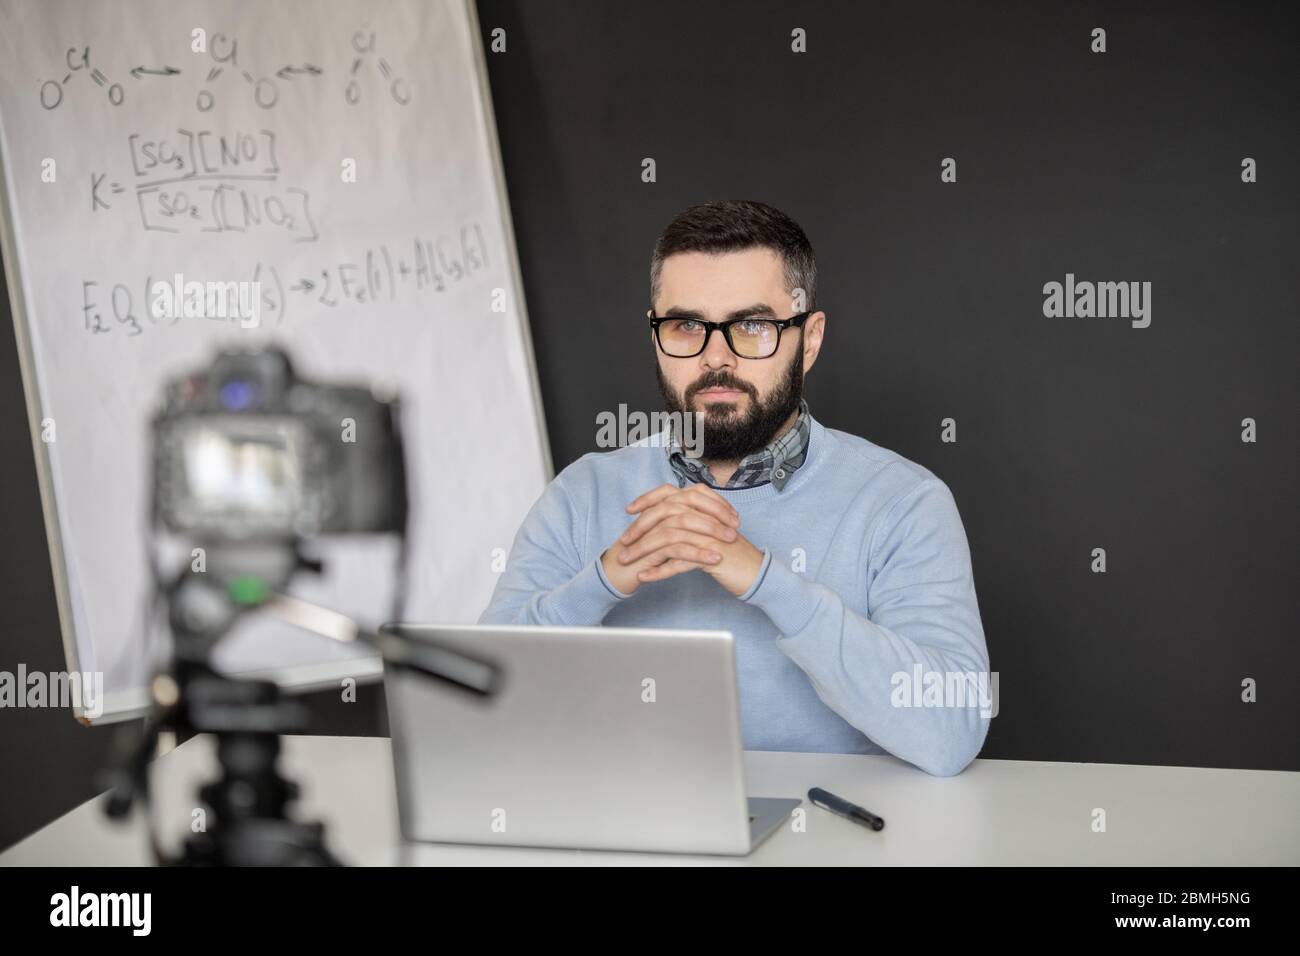 Serious bearded man holding hands by his face while looking at laptop display during remote lesson by whiteboard with chemical formulas Stock Photo